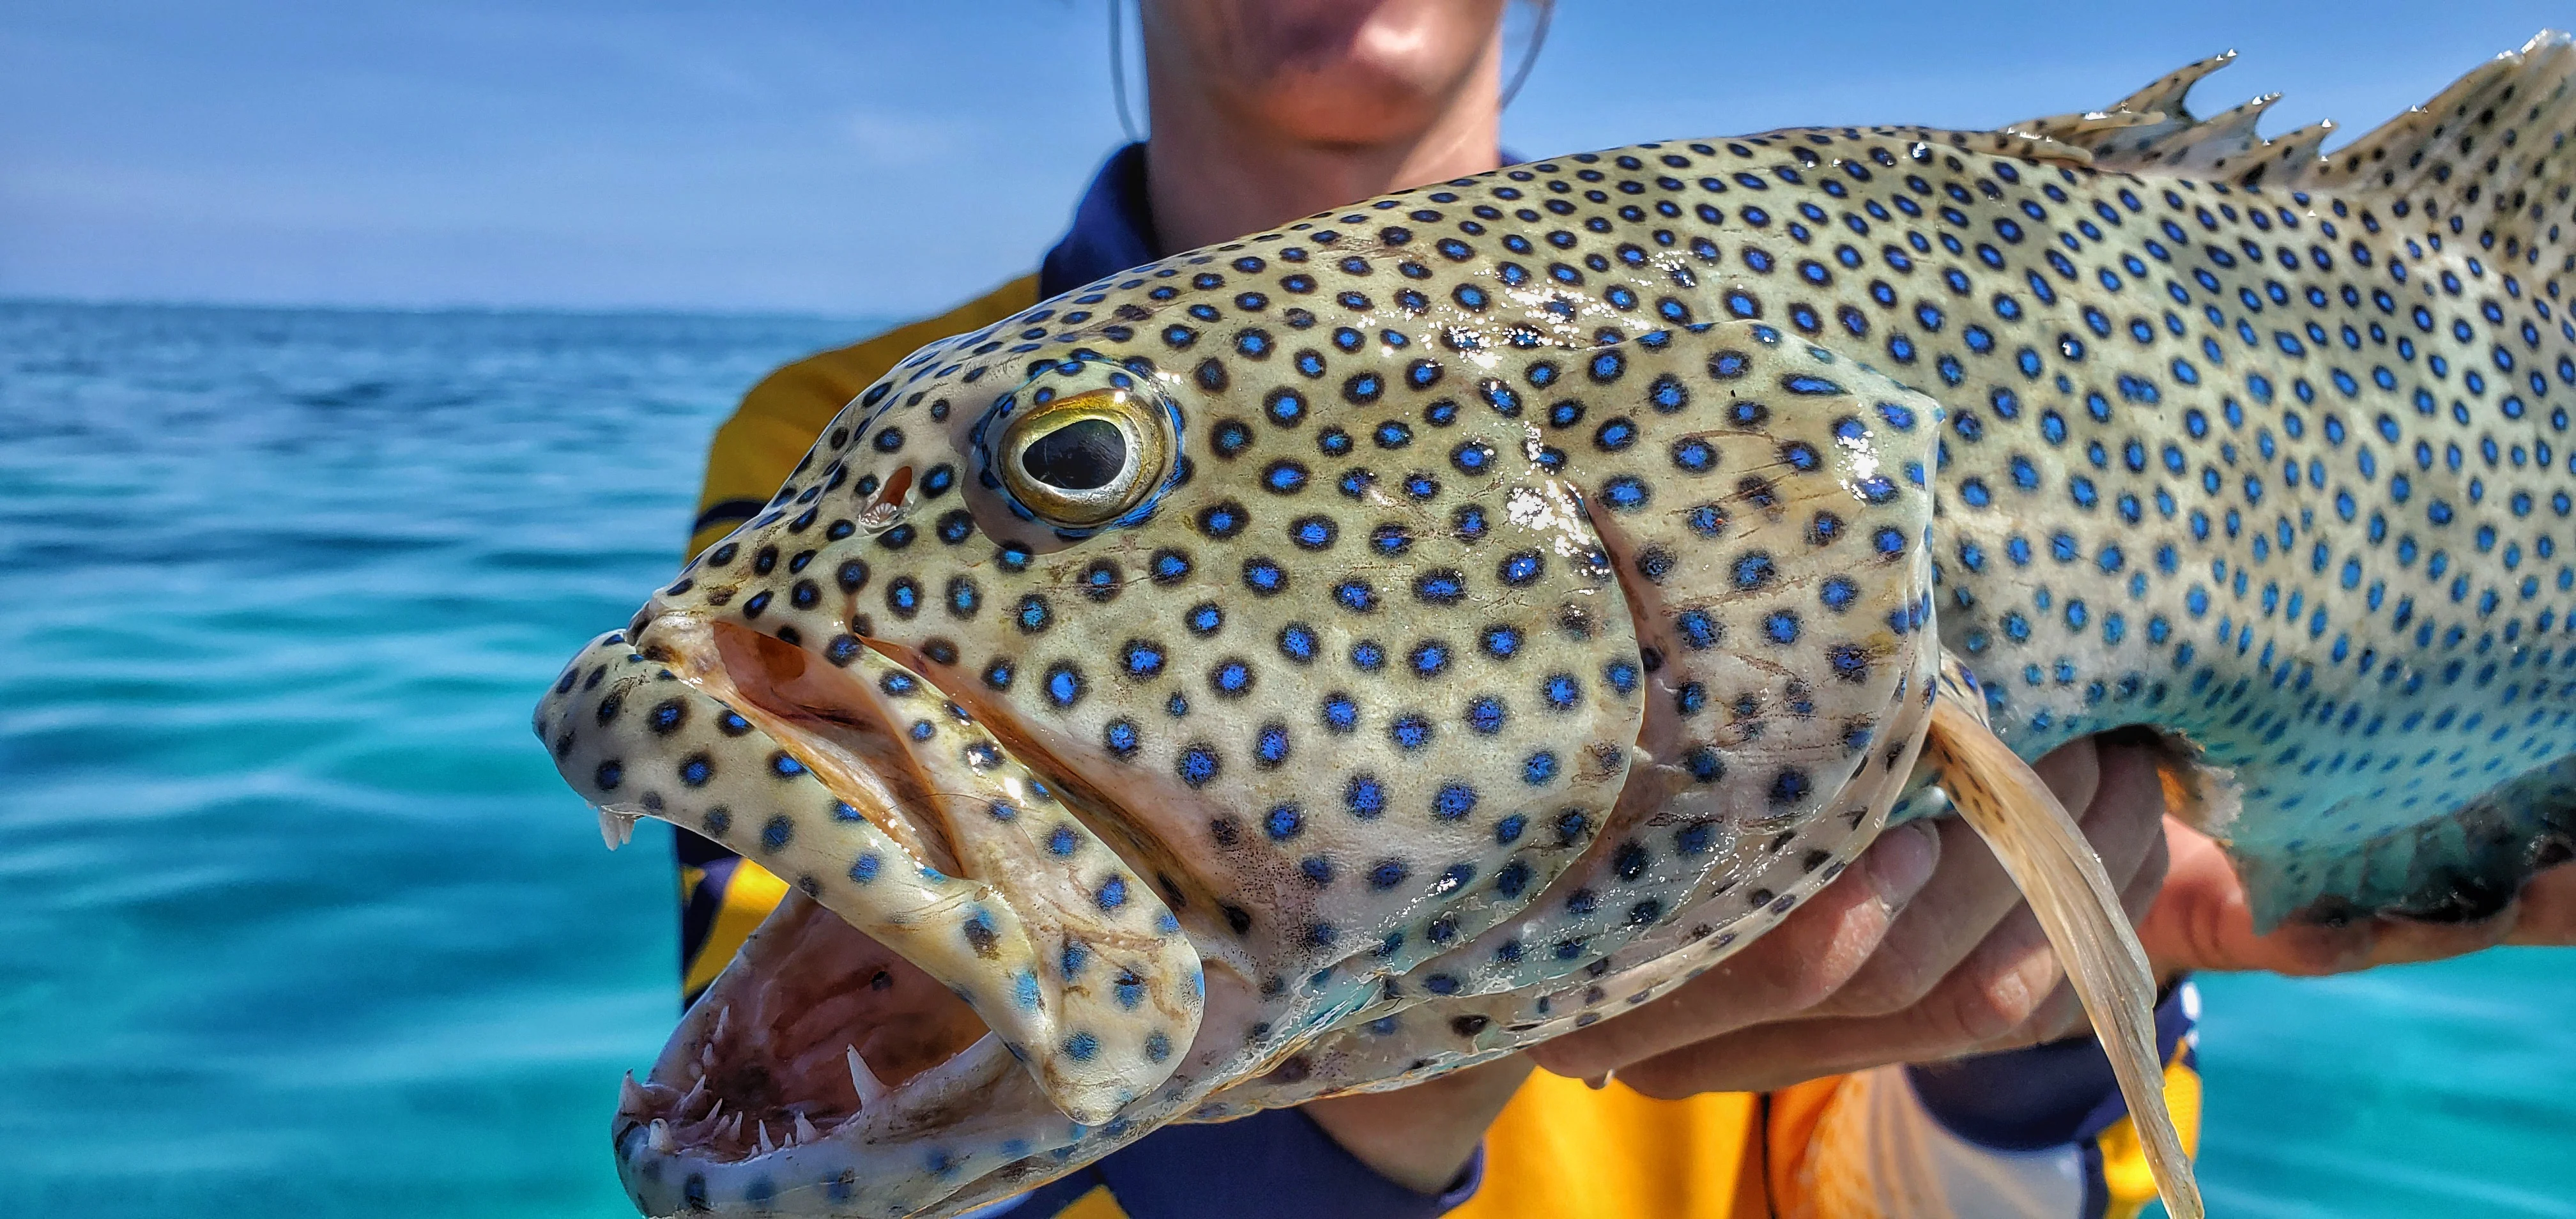 Coral Trout - Reef Fishing on Vimeo